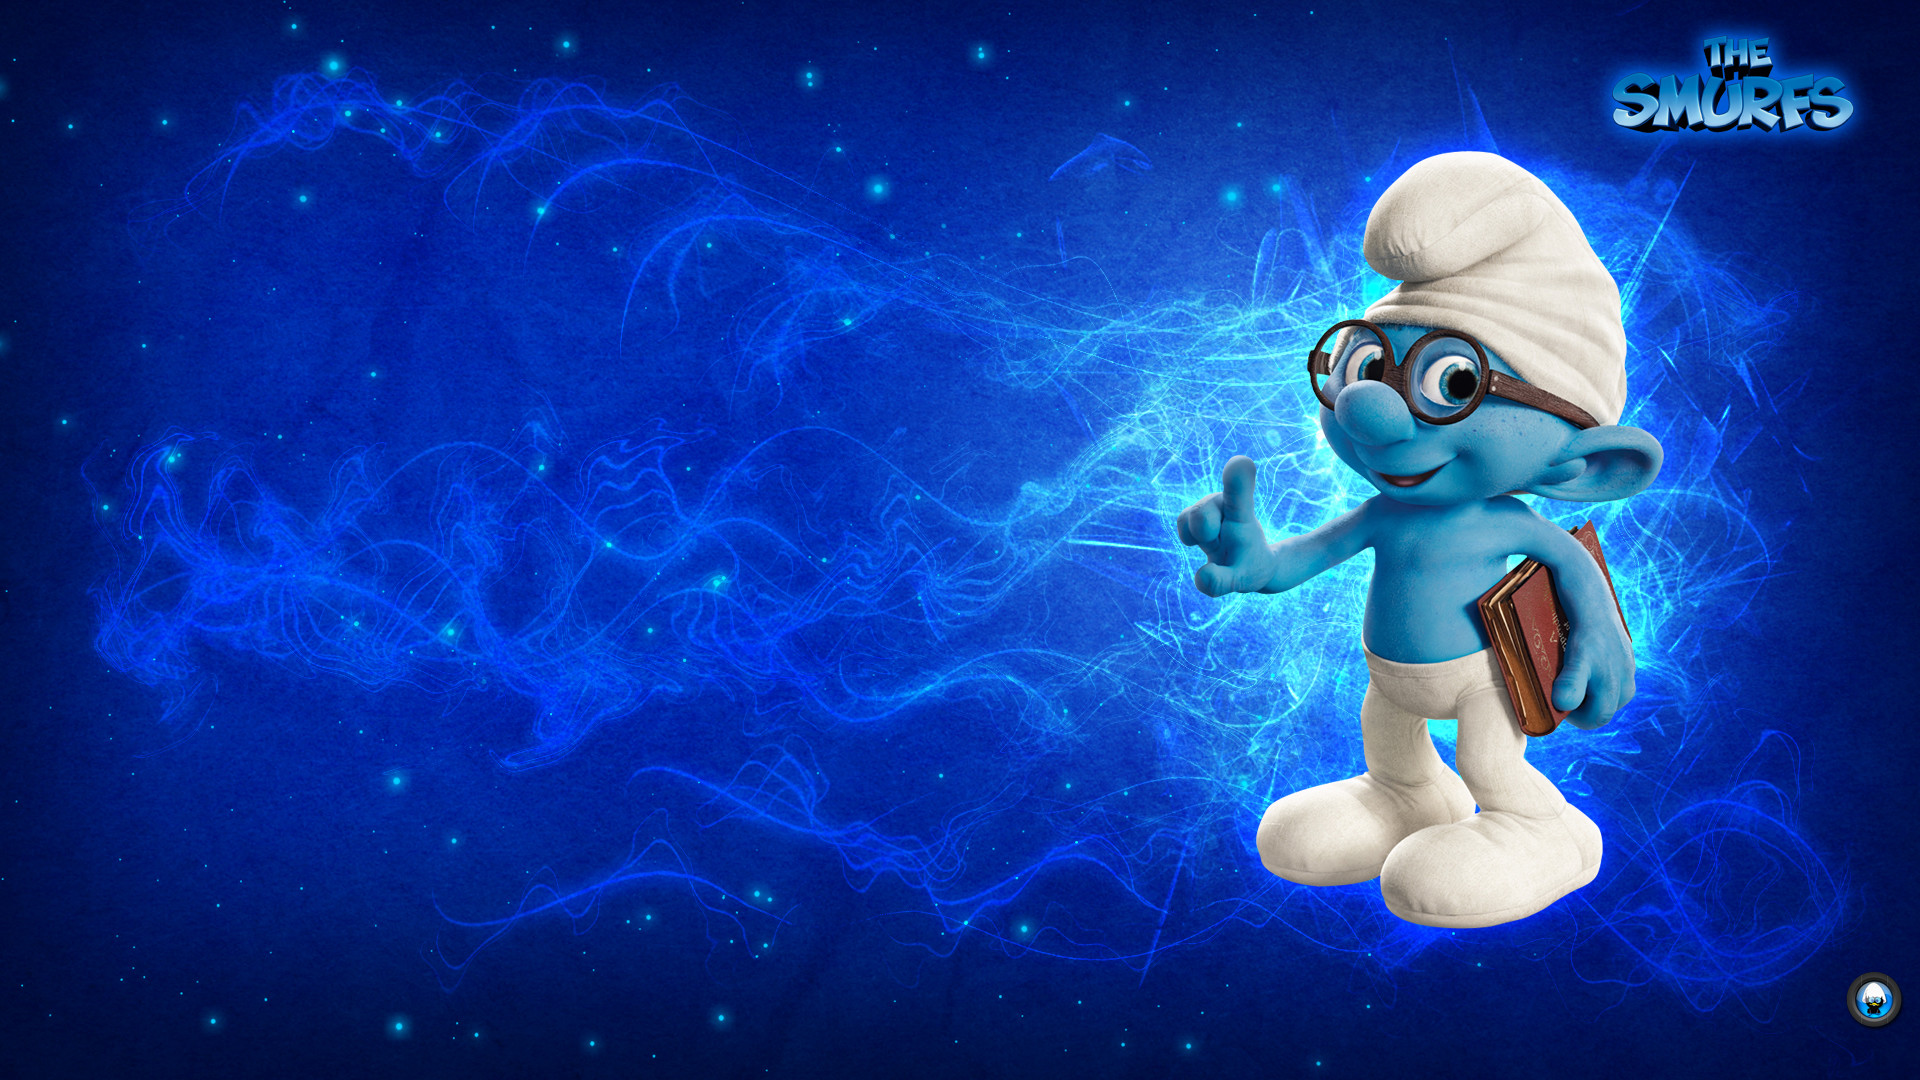 50 Smurfs HD Wallpapers and Backgrounds